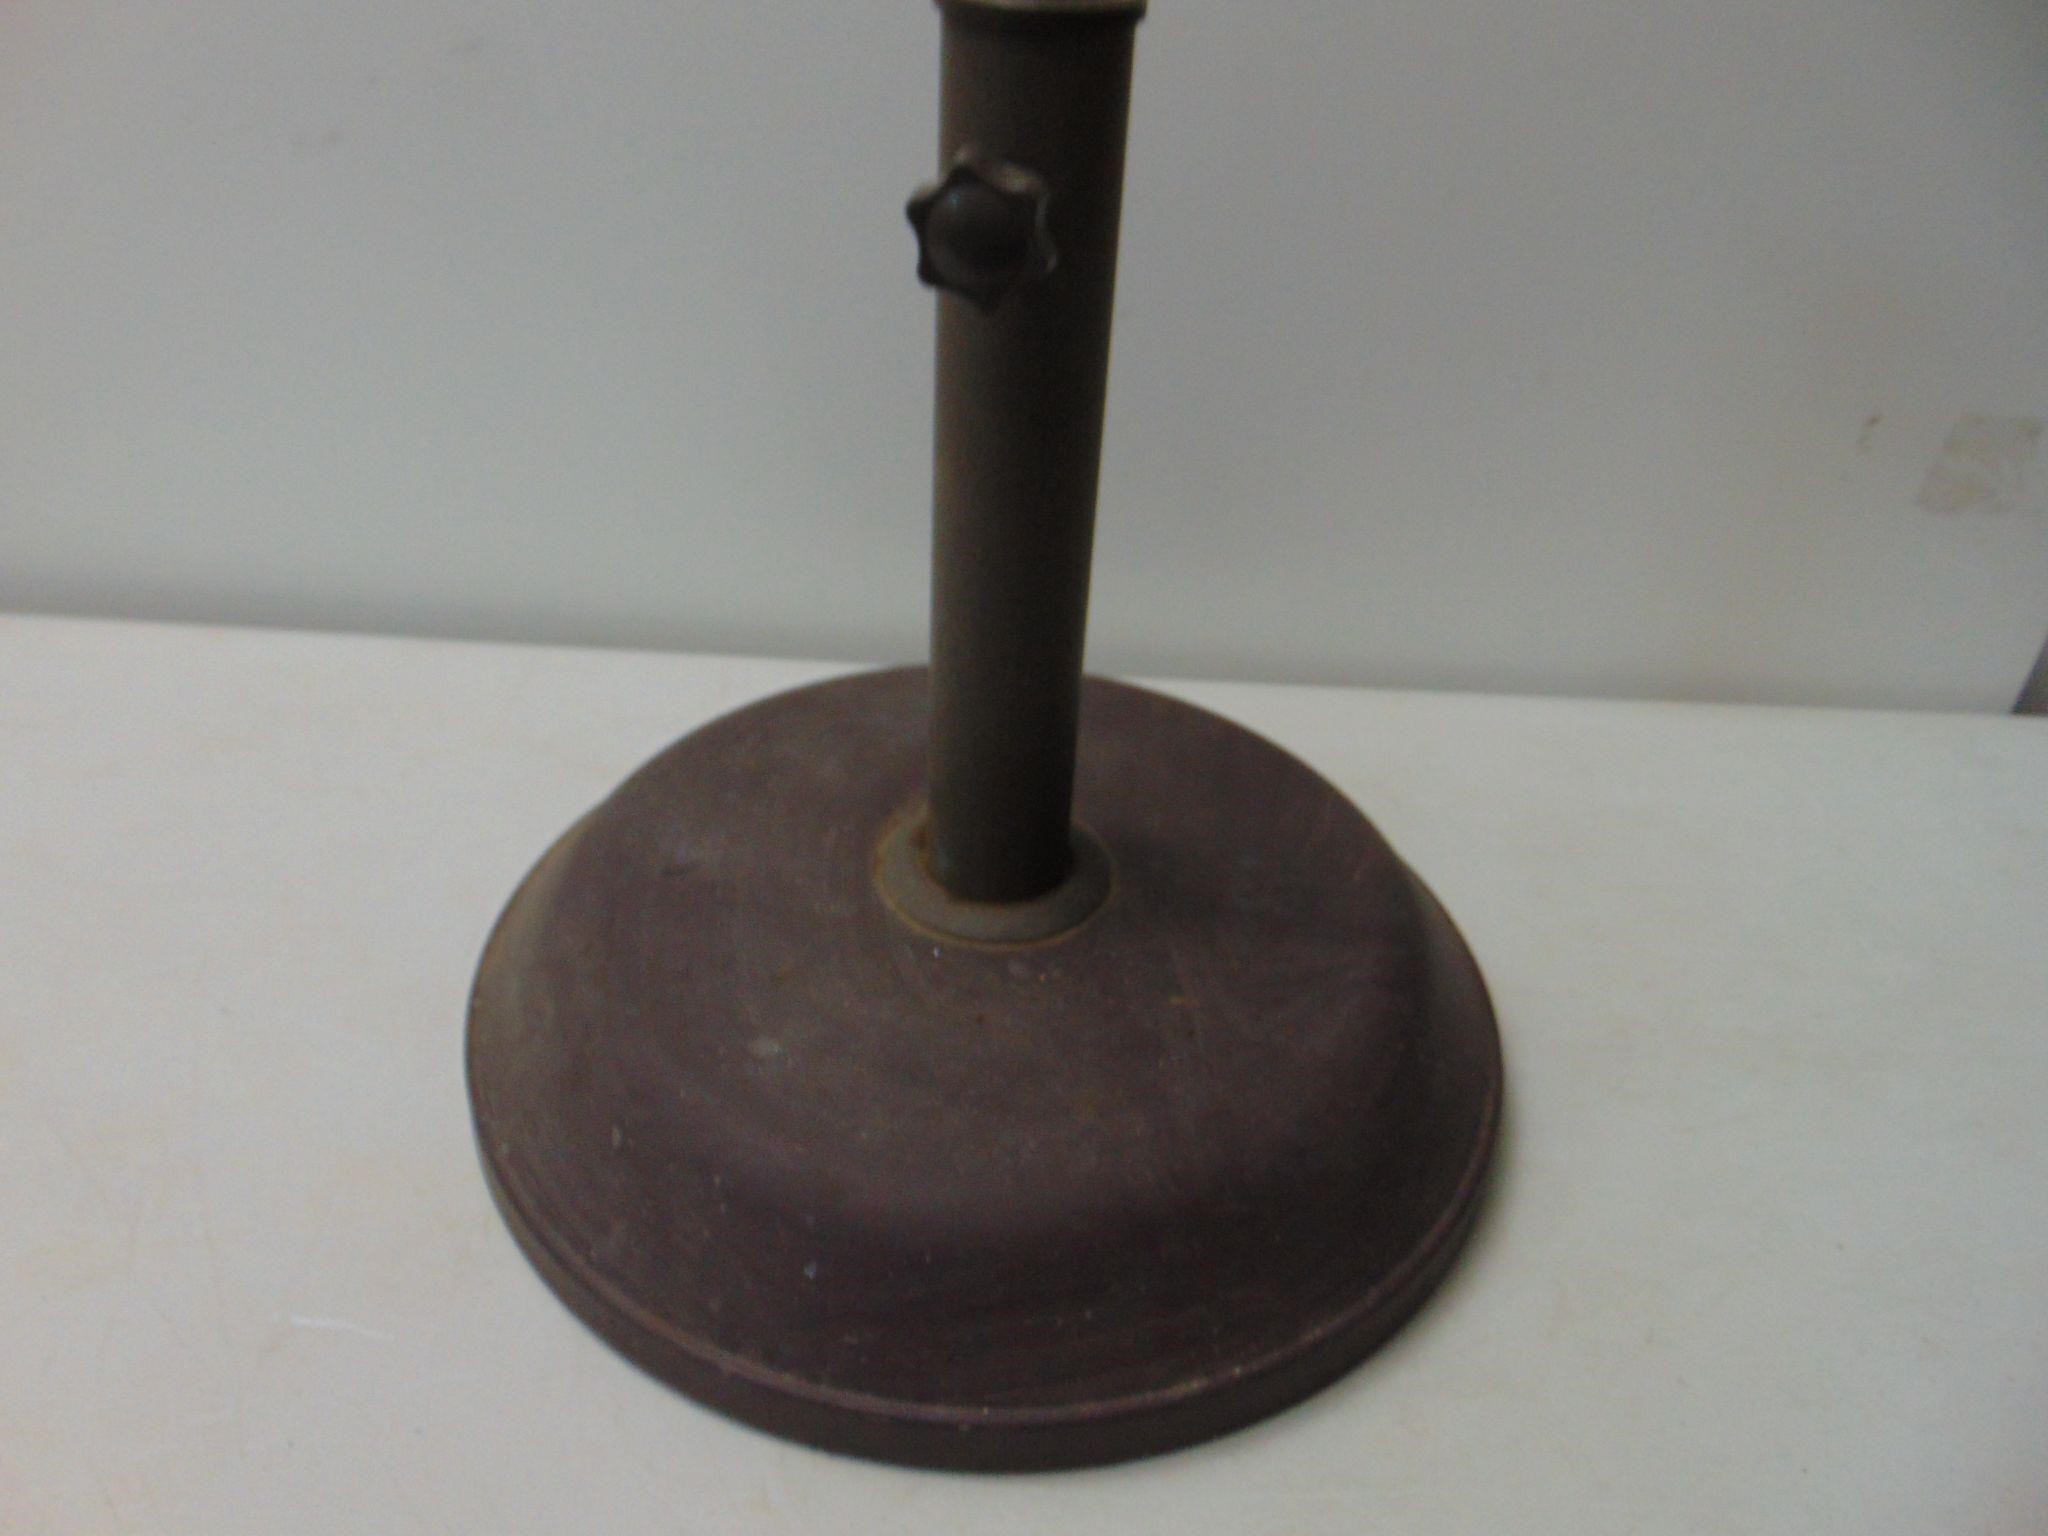 Heavy Metal Umbrella Base - Weighs about 30 lbs